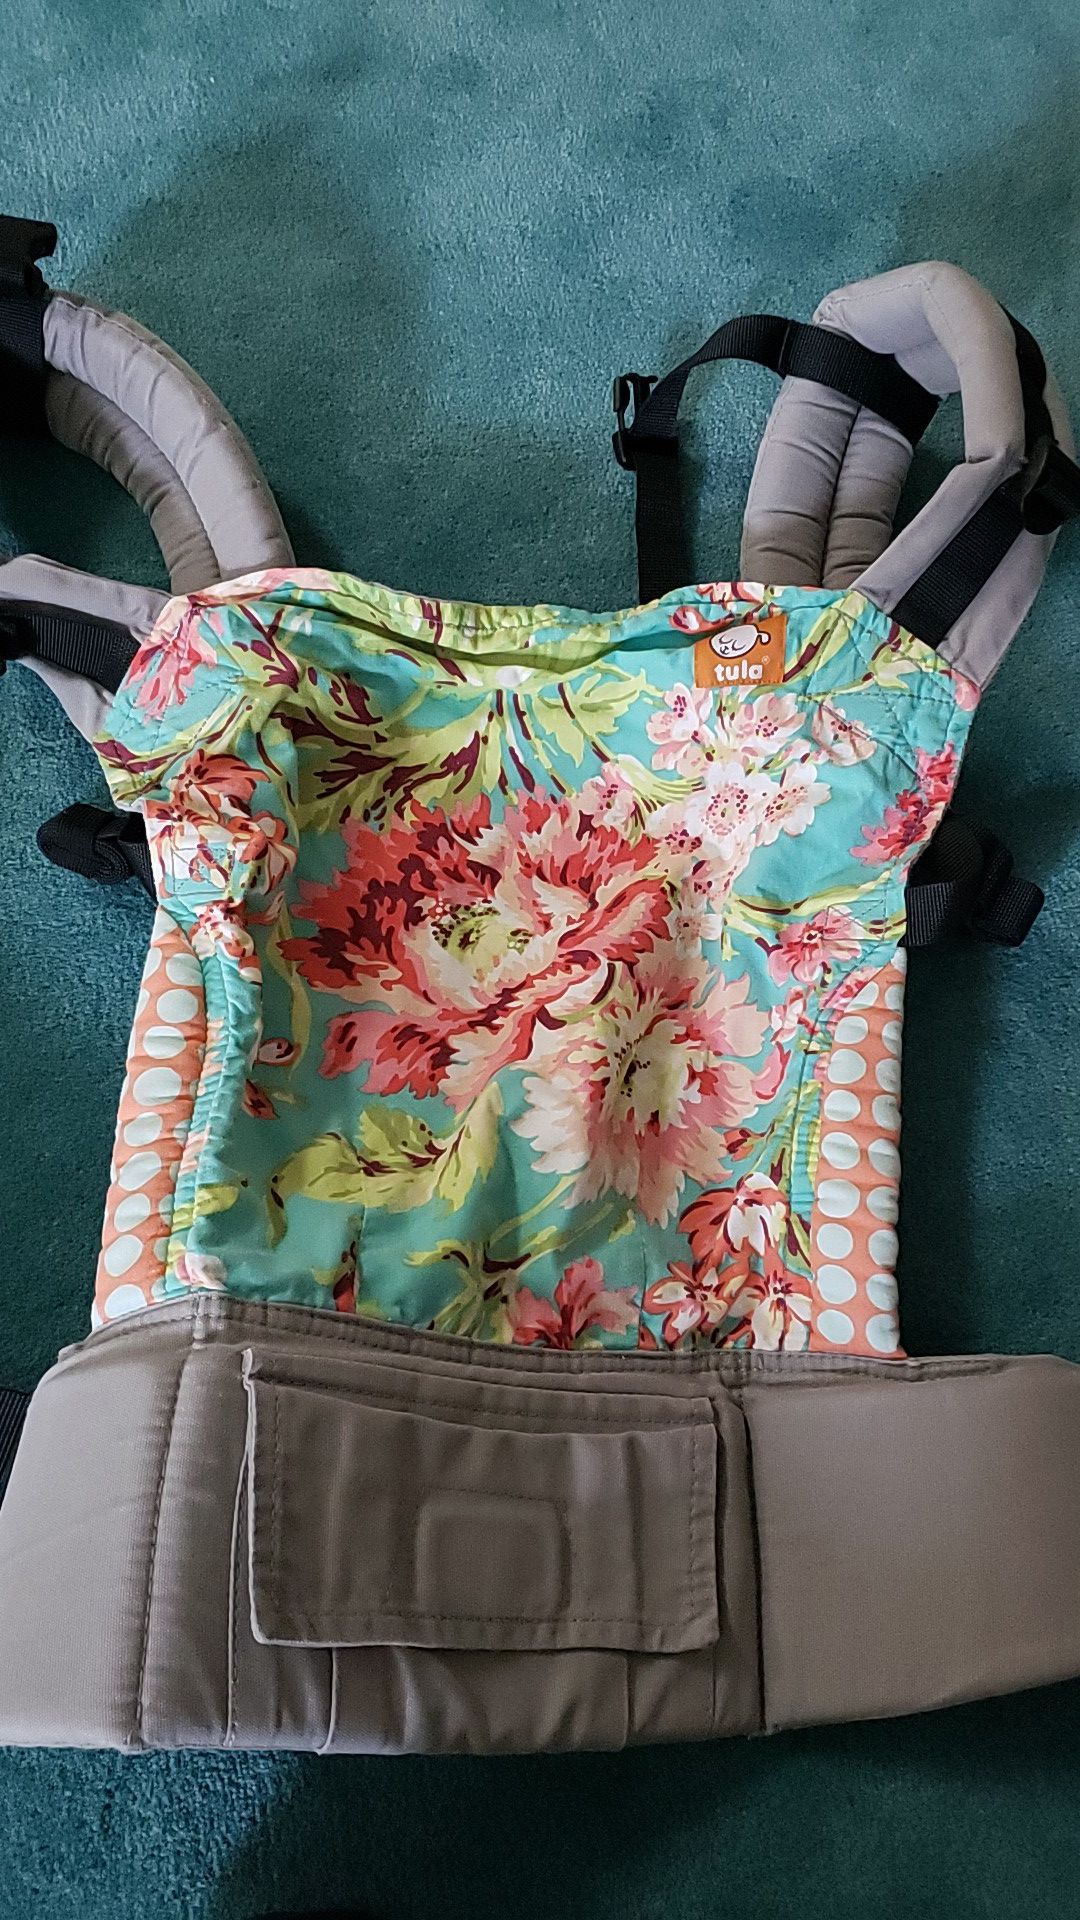 Tula baby carrier